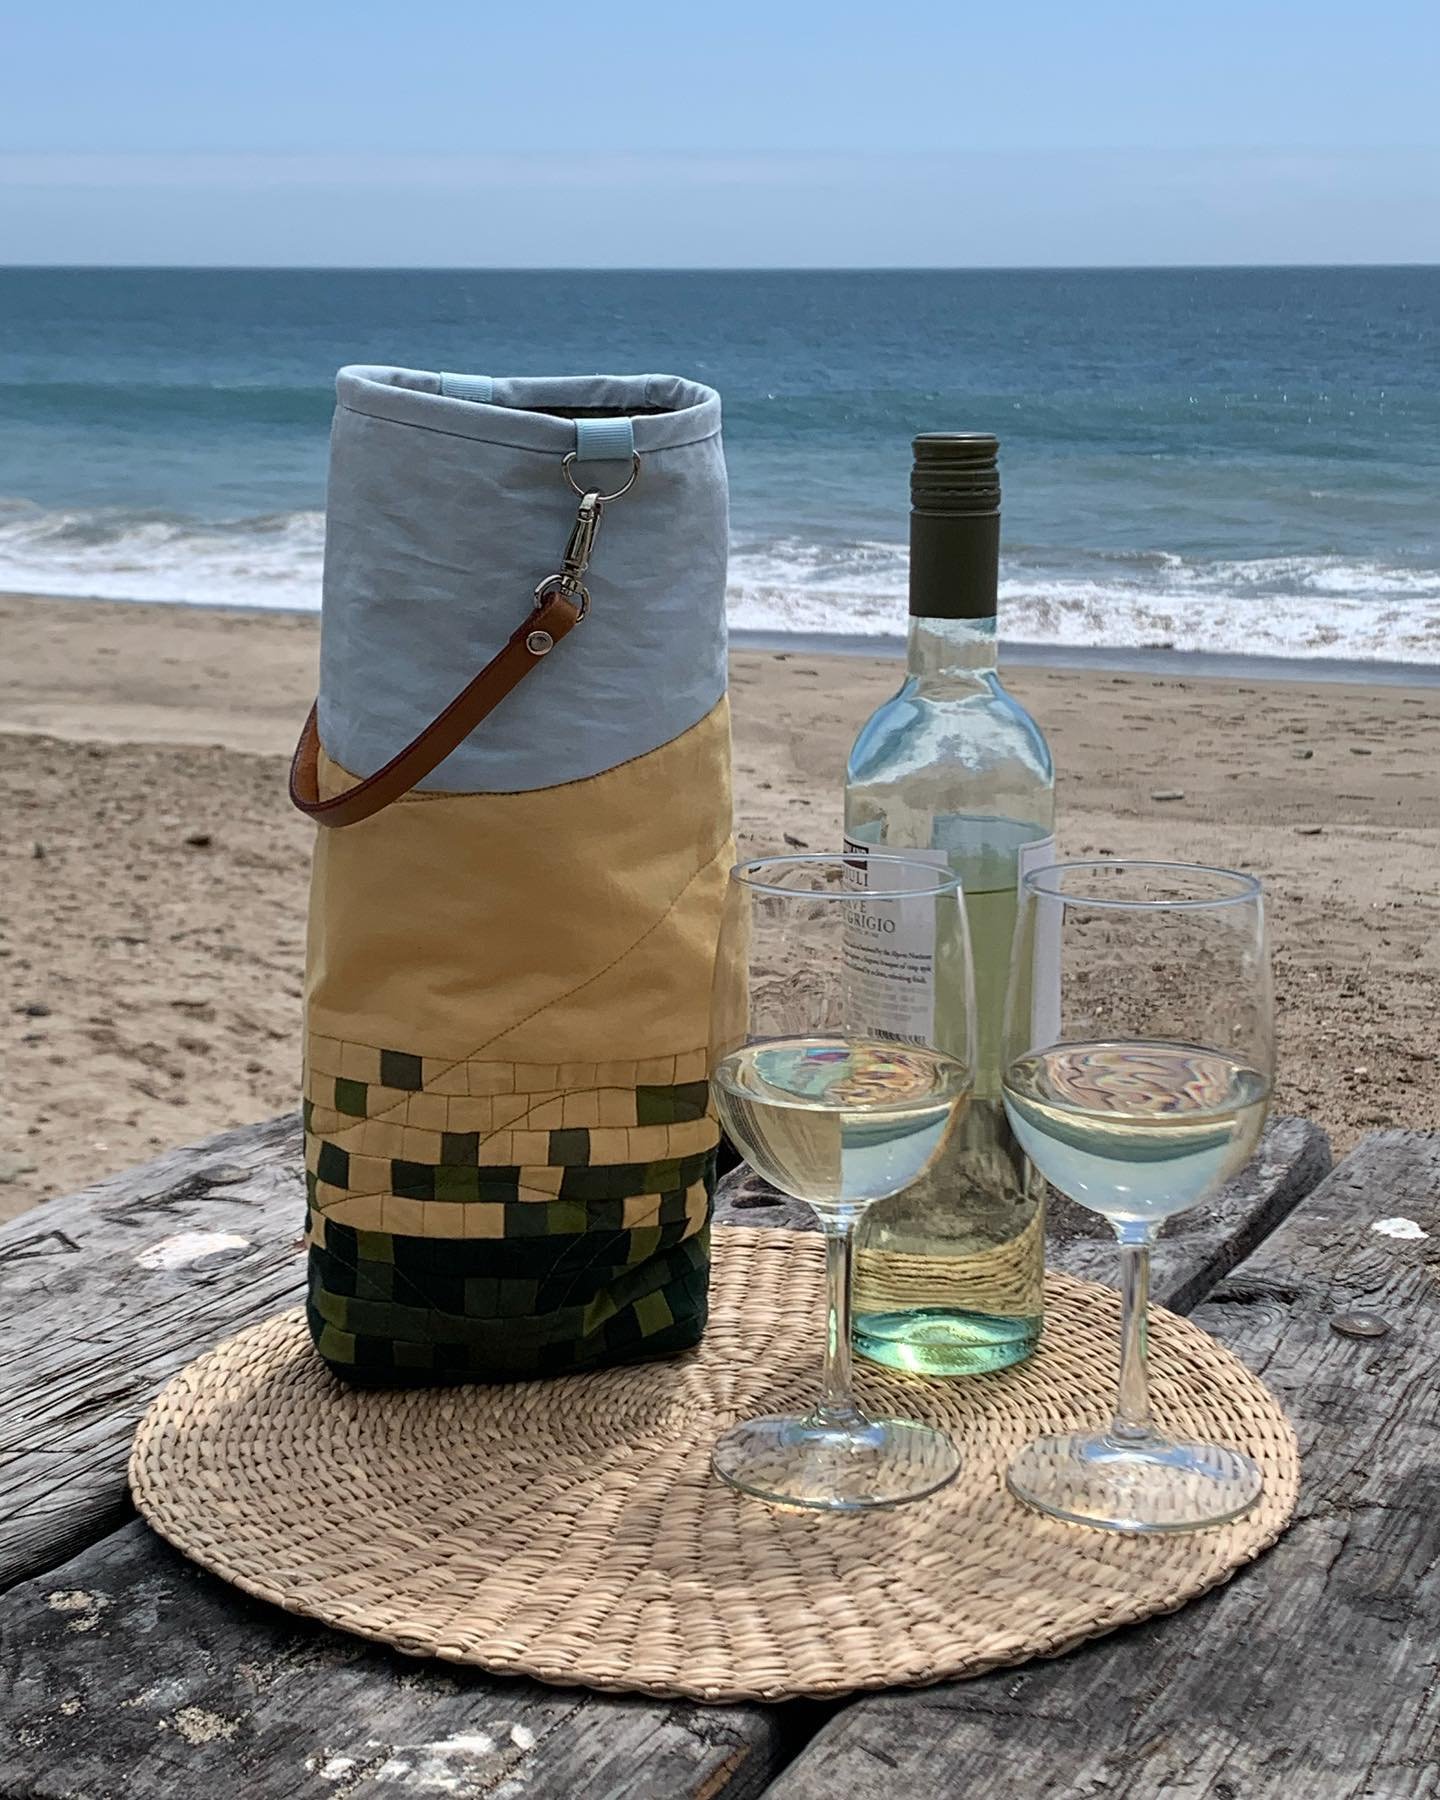 Cheers! Enjoy a few photos from last week&rsquo;s photo shoot on Pacific Coast Highway at Sycamore Cove State Beach! My NEW Wine Country Tote is now on my website and ready to ship. Let&rsquo;s get ready for summer 🥂😎🥂

100% designed and made by m